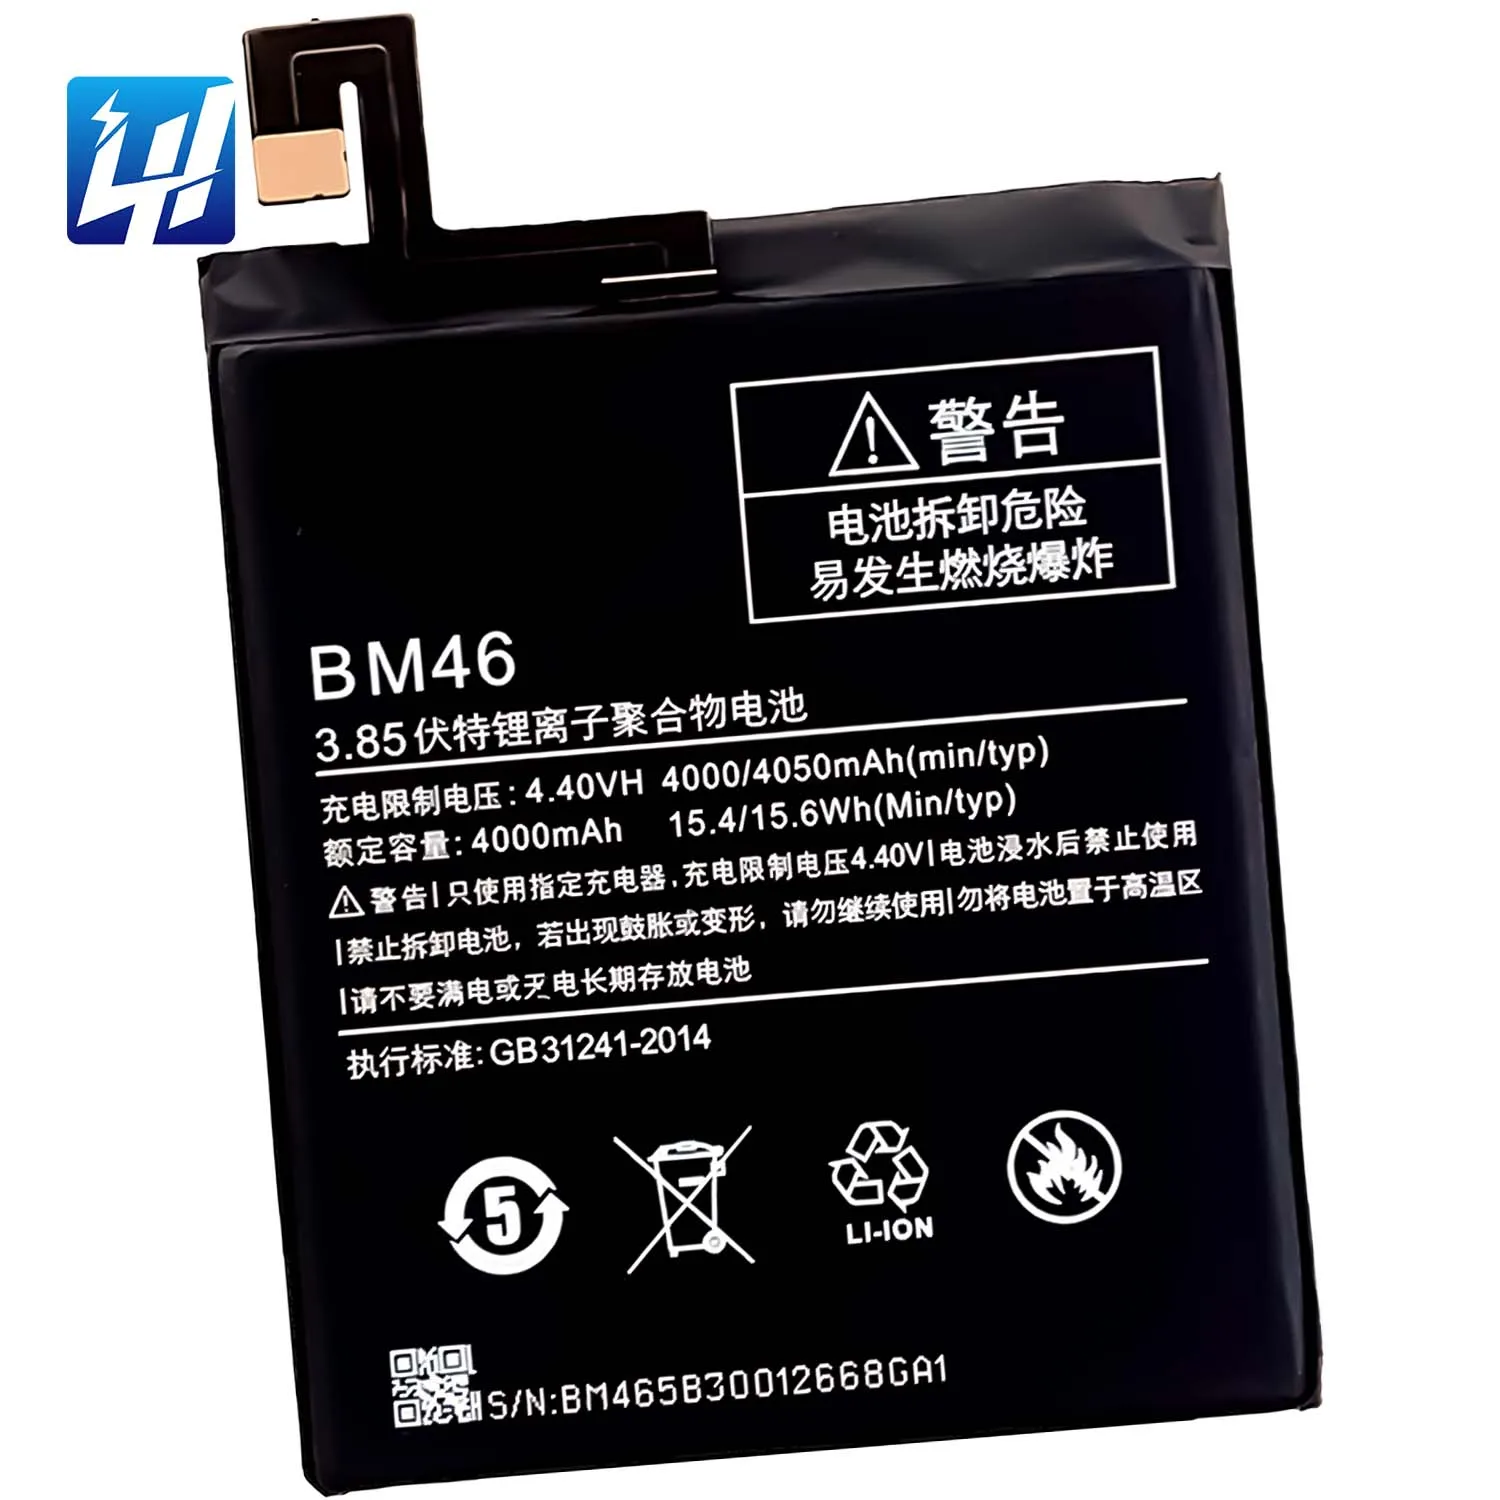 

OEM BM46 hight capacity battery for Xiao mi Redmi Note 3 2015116 2015161